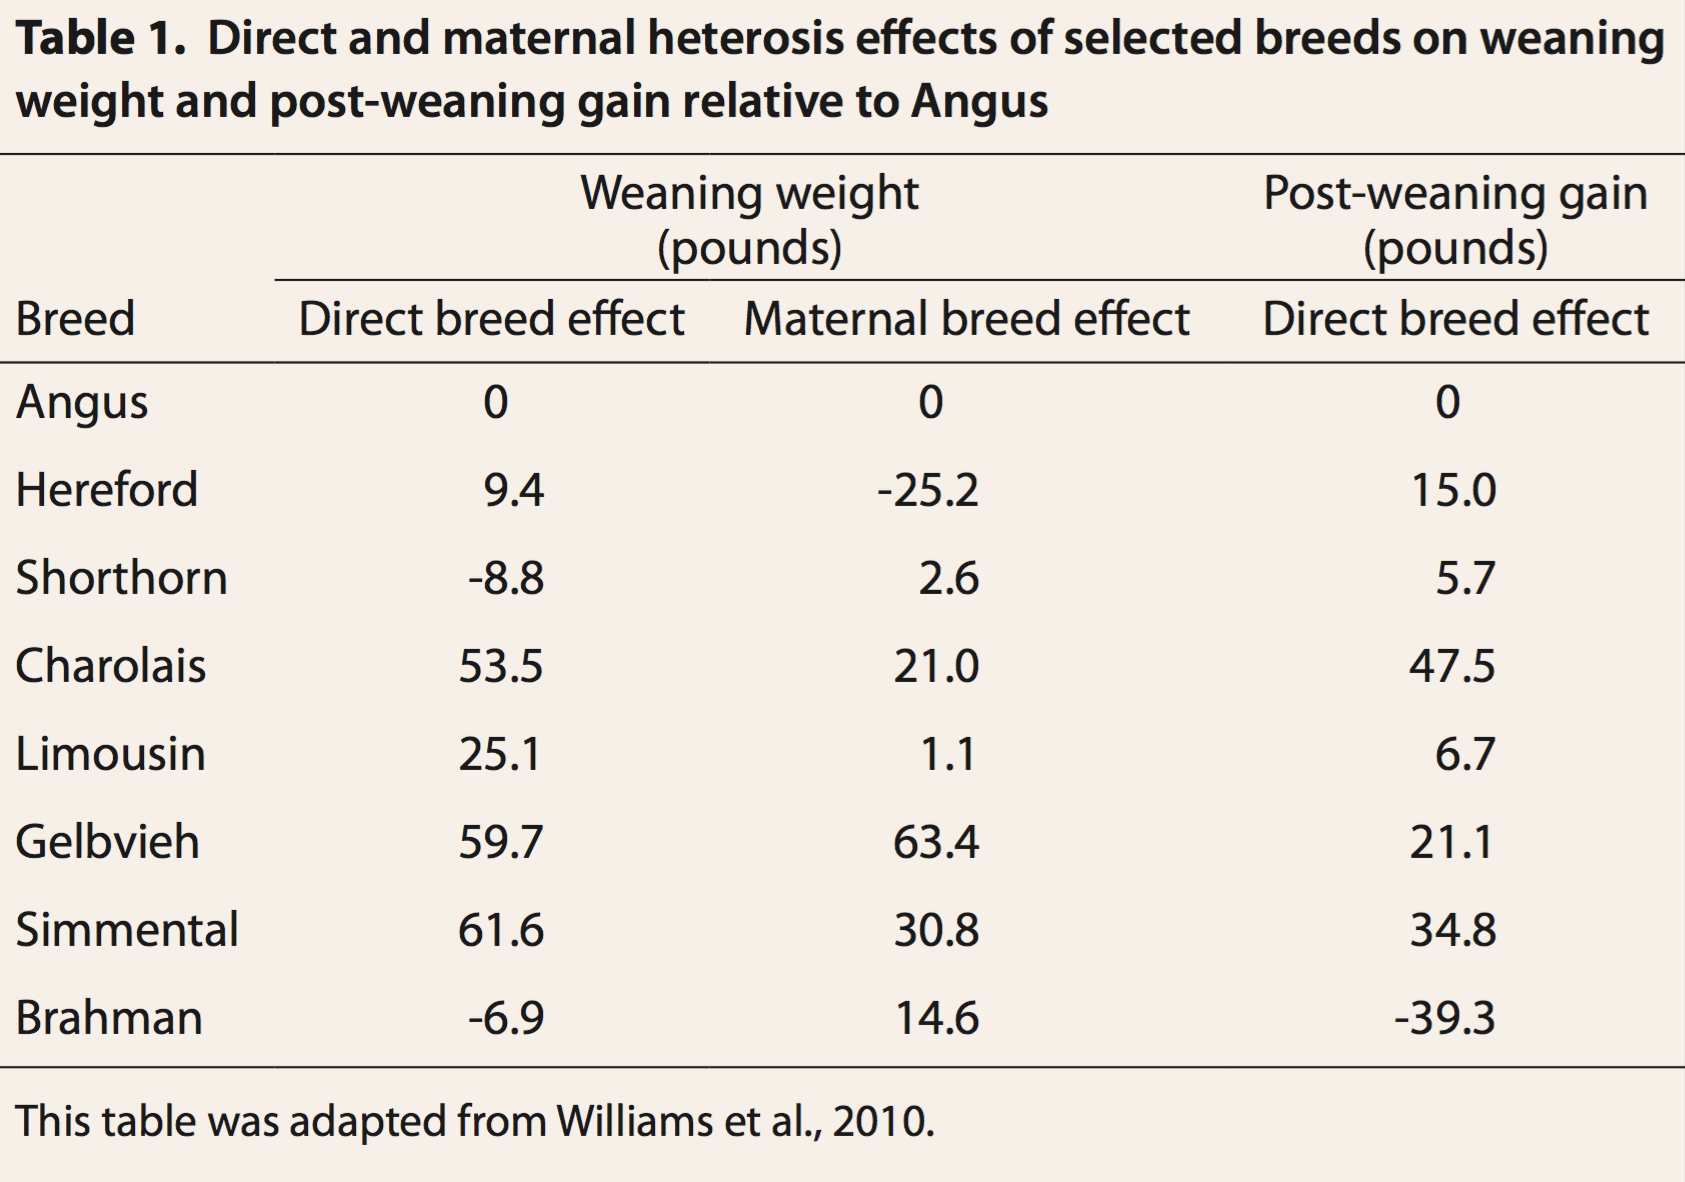 Table 1. Direct and maternal heterosis effects of selected breeds on weaning weight and post-weaning gain relative to angus.